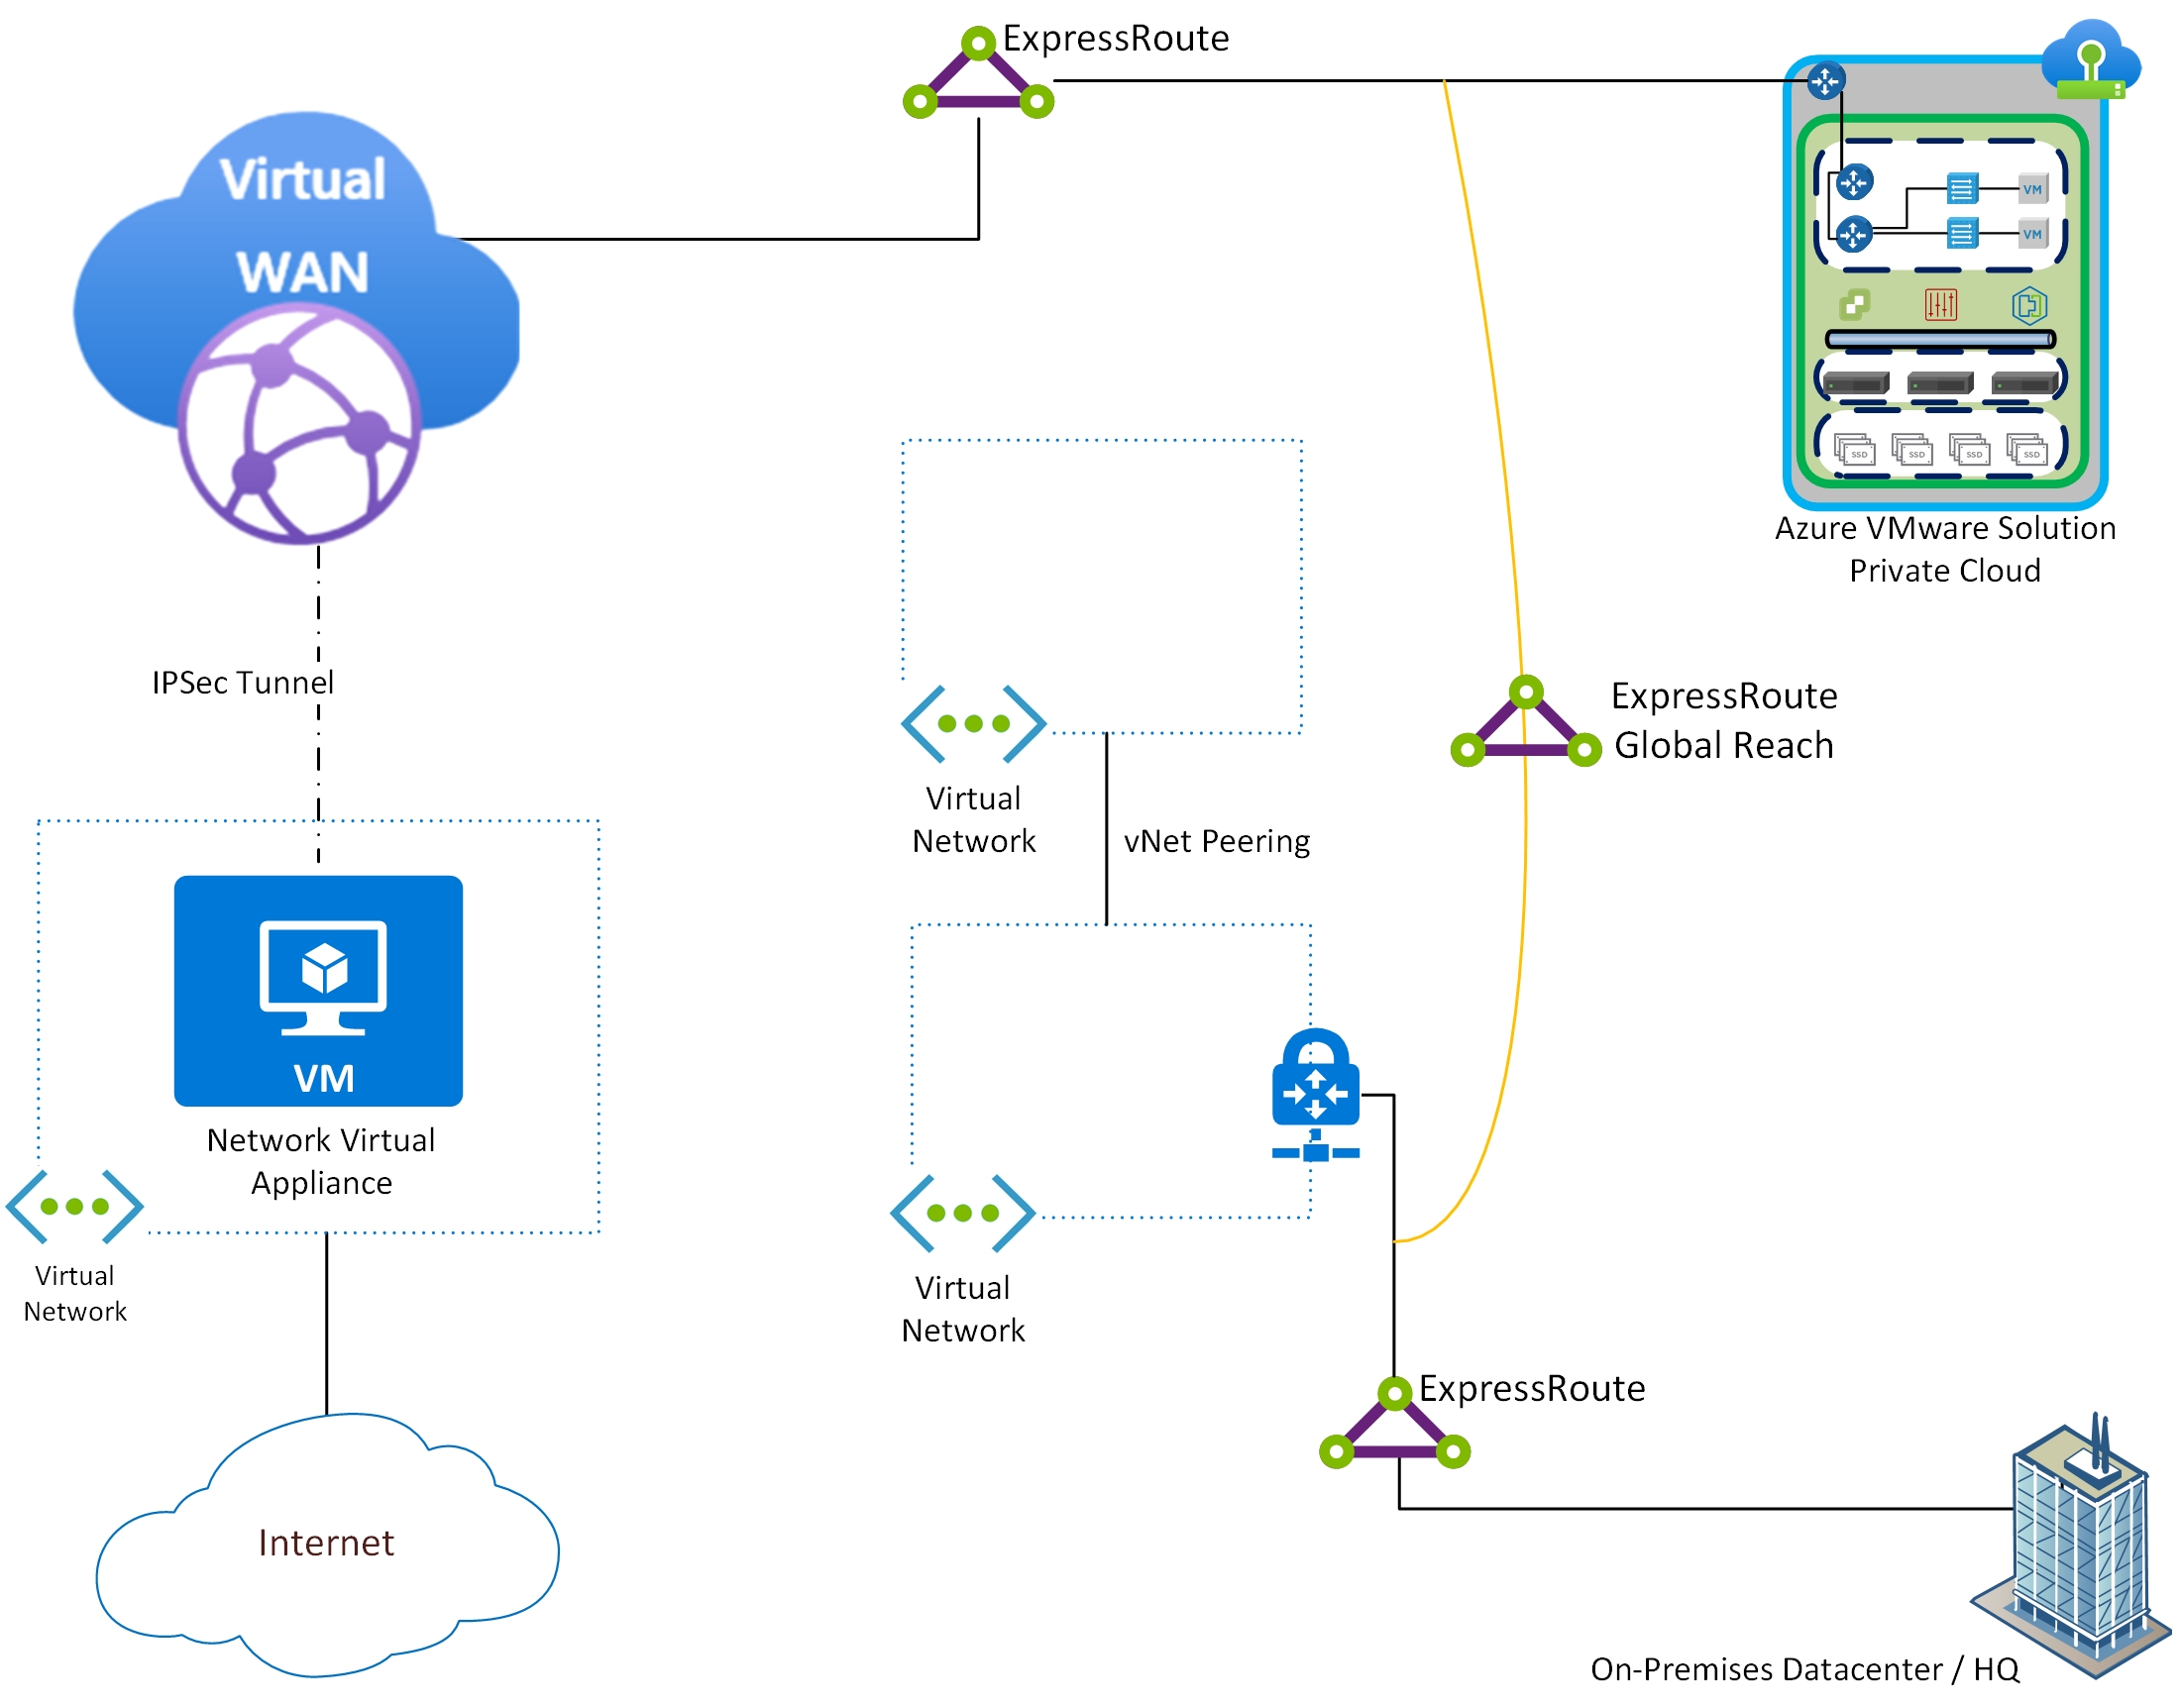 Inspecting Azure VMware Solution traffic with Network Virtual Appliance in Azure vNet